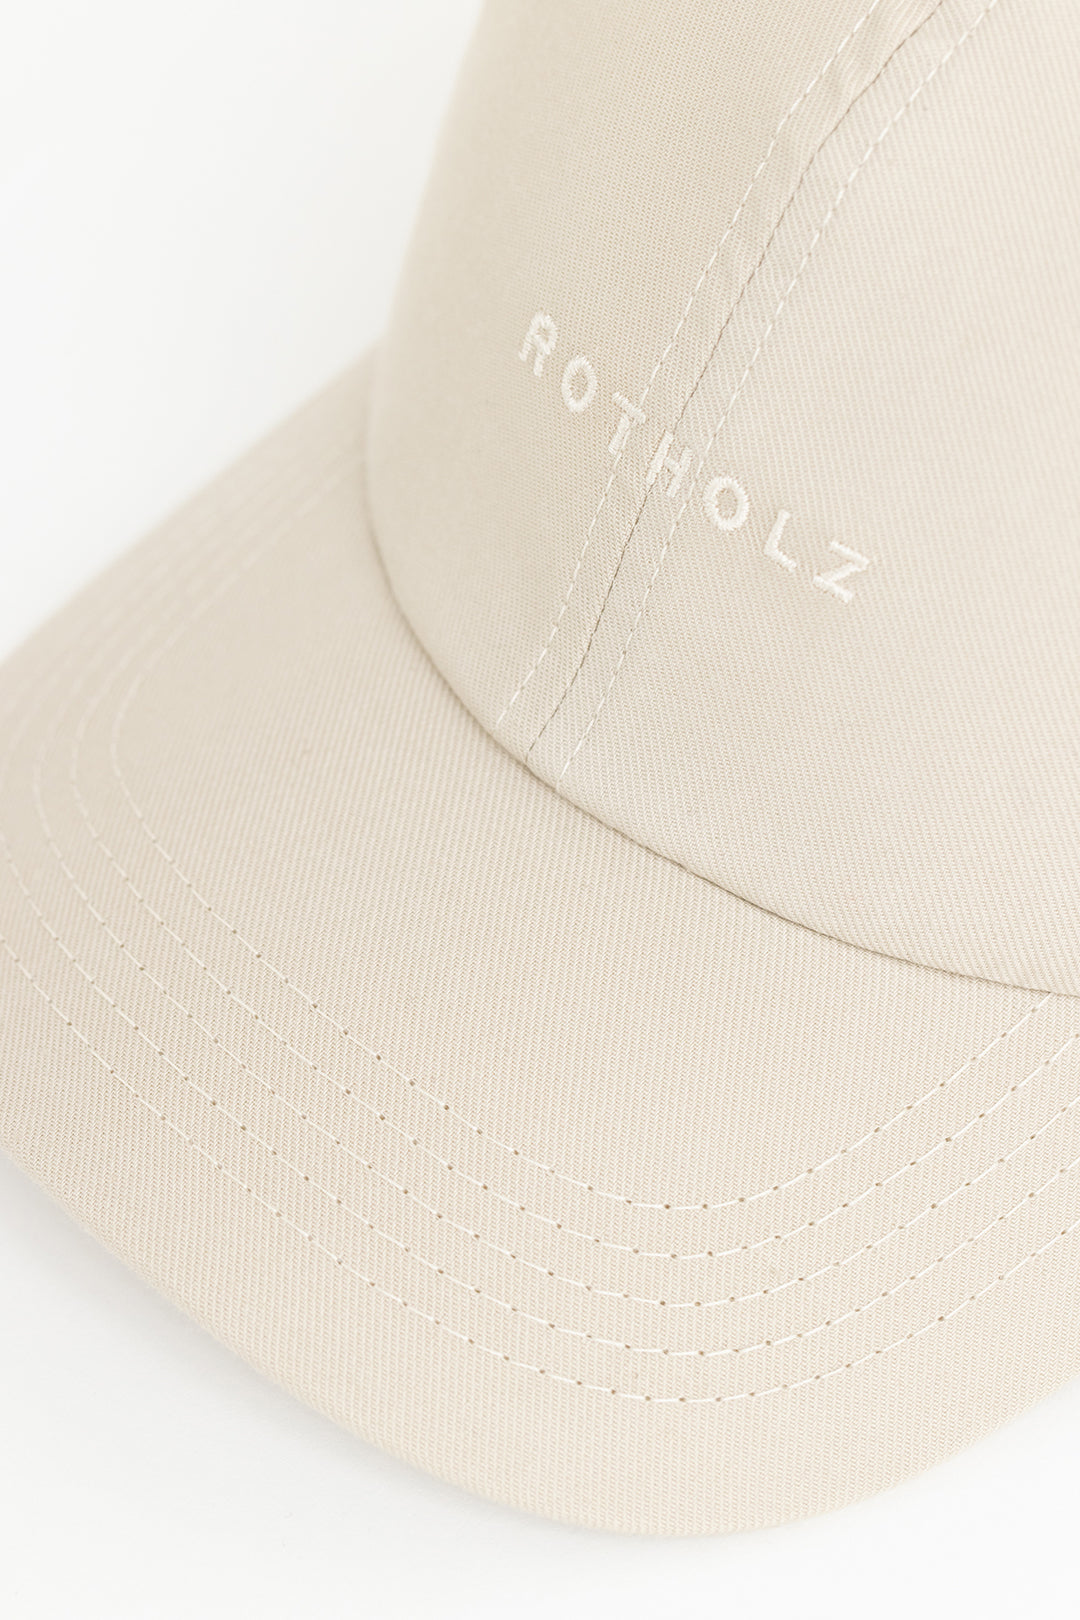 Beige Cap Dad made from 100% organic cotton from Rotholz